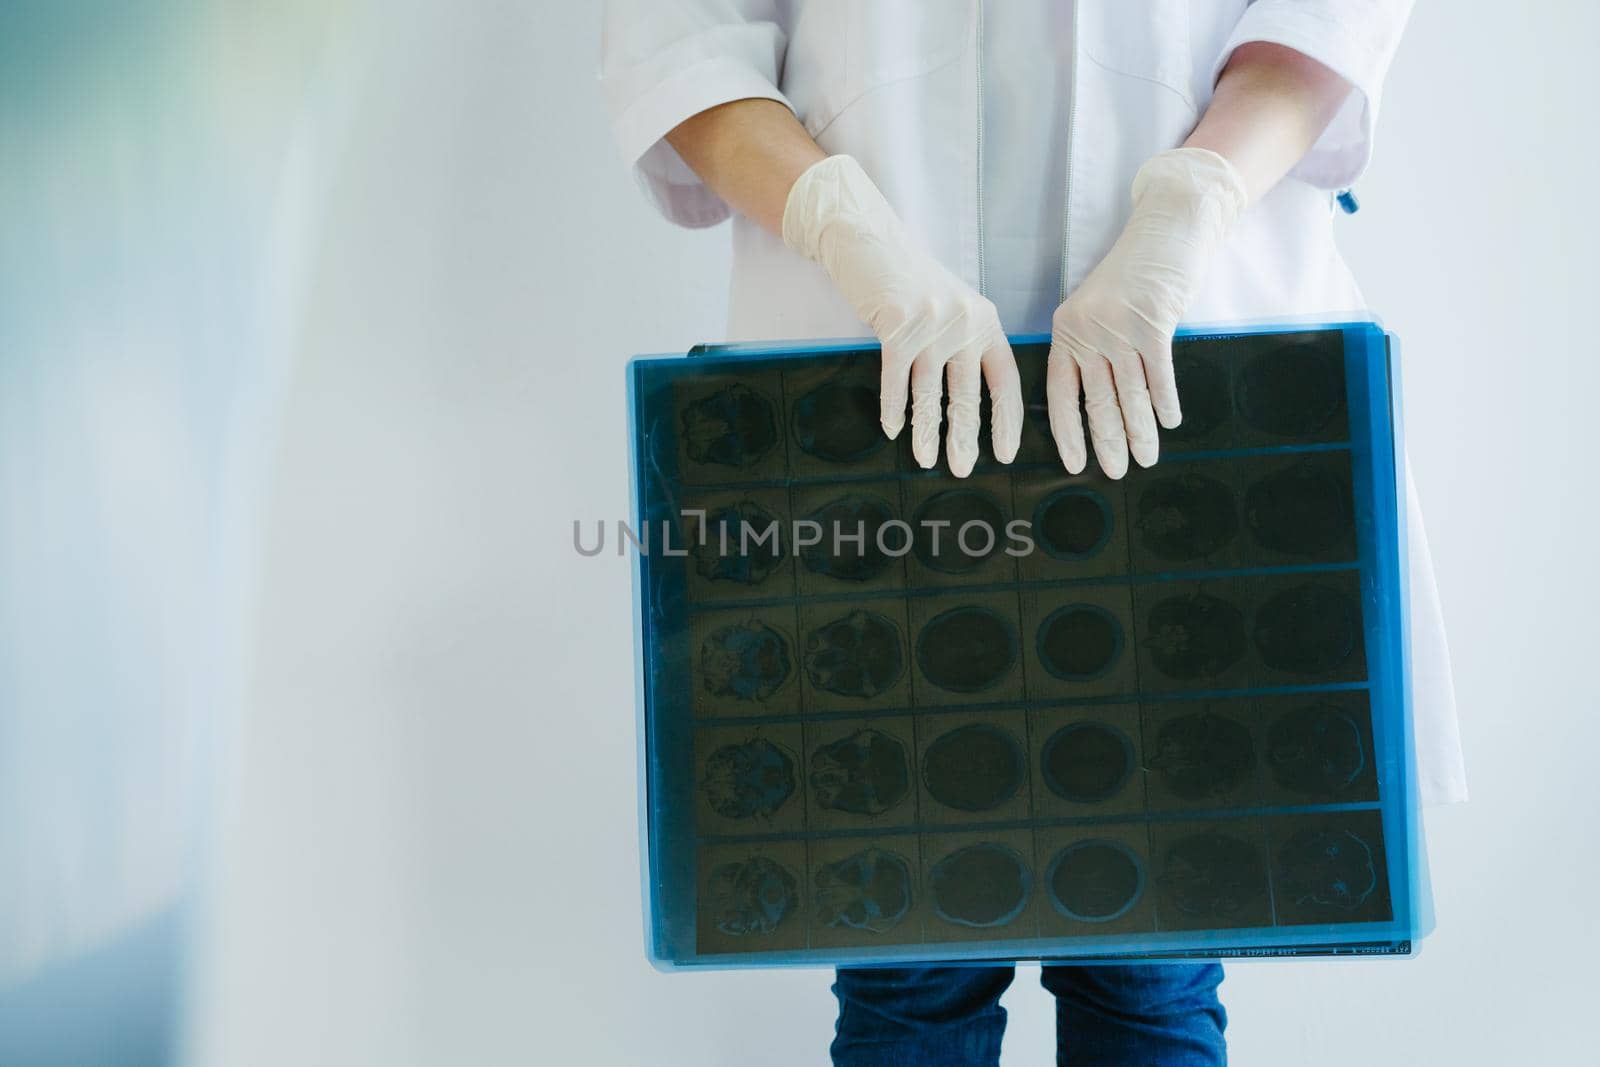 The girl doctor's is holding X-ray examinations in her hands. The doctor's hands are gloved.